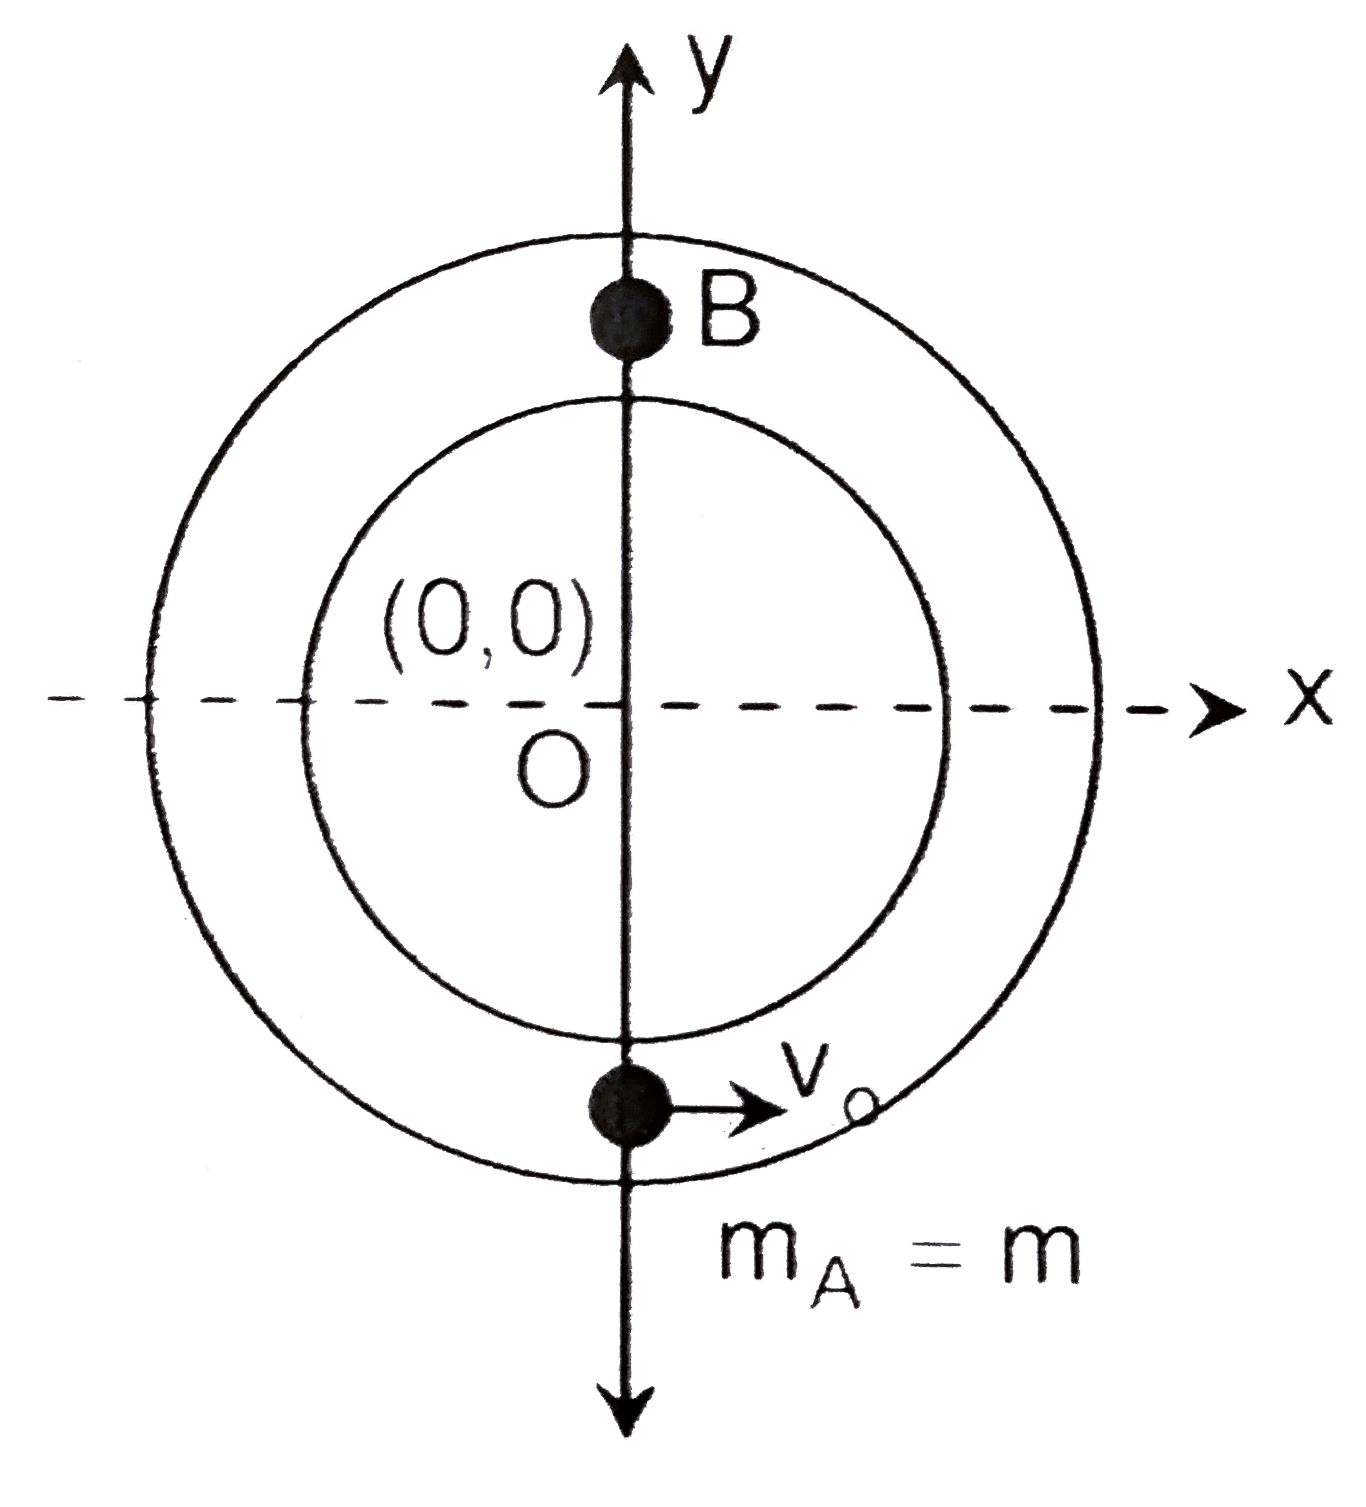 A hollow circular tube of radius R and negligible internal diameter is fixed on horizontal surface ball A of mas m is given velocity v(o) in the shown direction. It collides with ball B of mass 2 m. Collision is perfectly elastic. If centre of loop is origin of co-ordinates system, then co-ordinate of next collision is